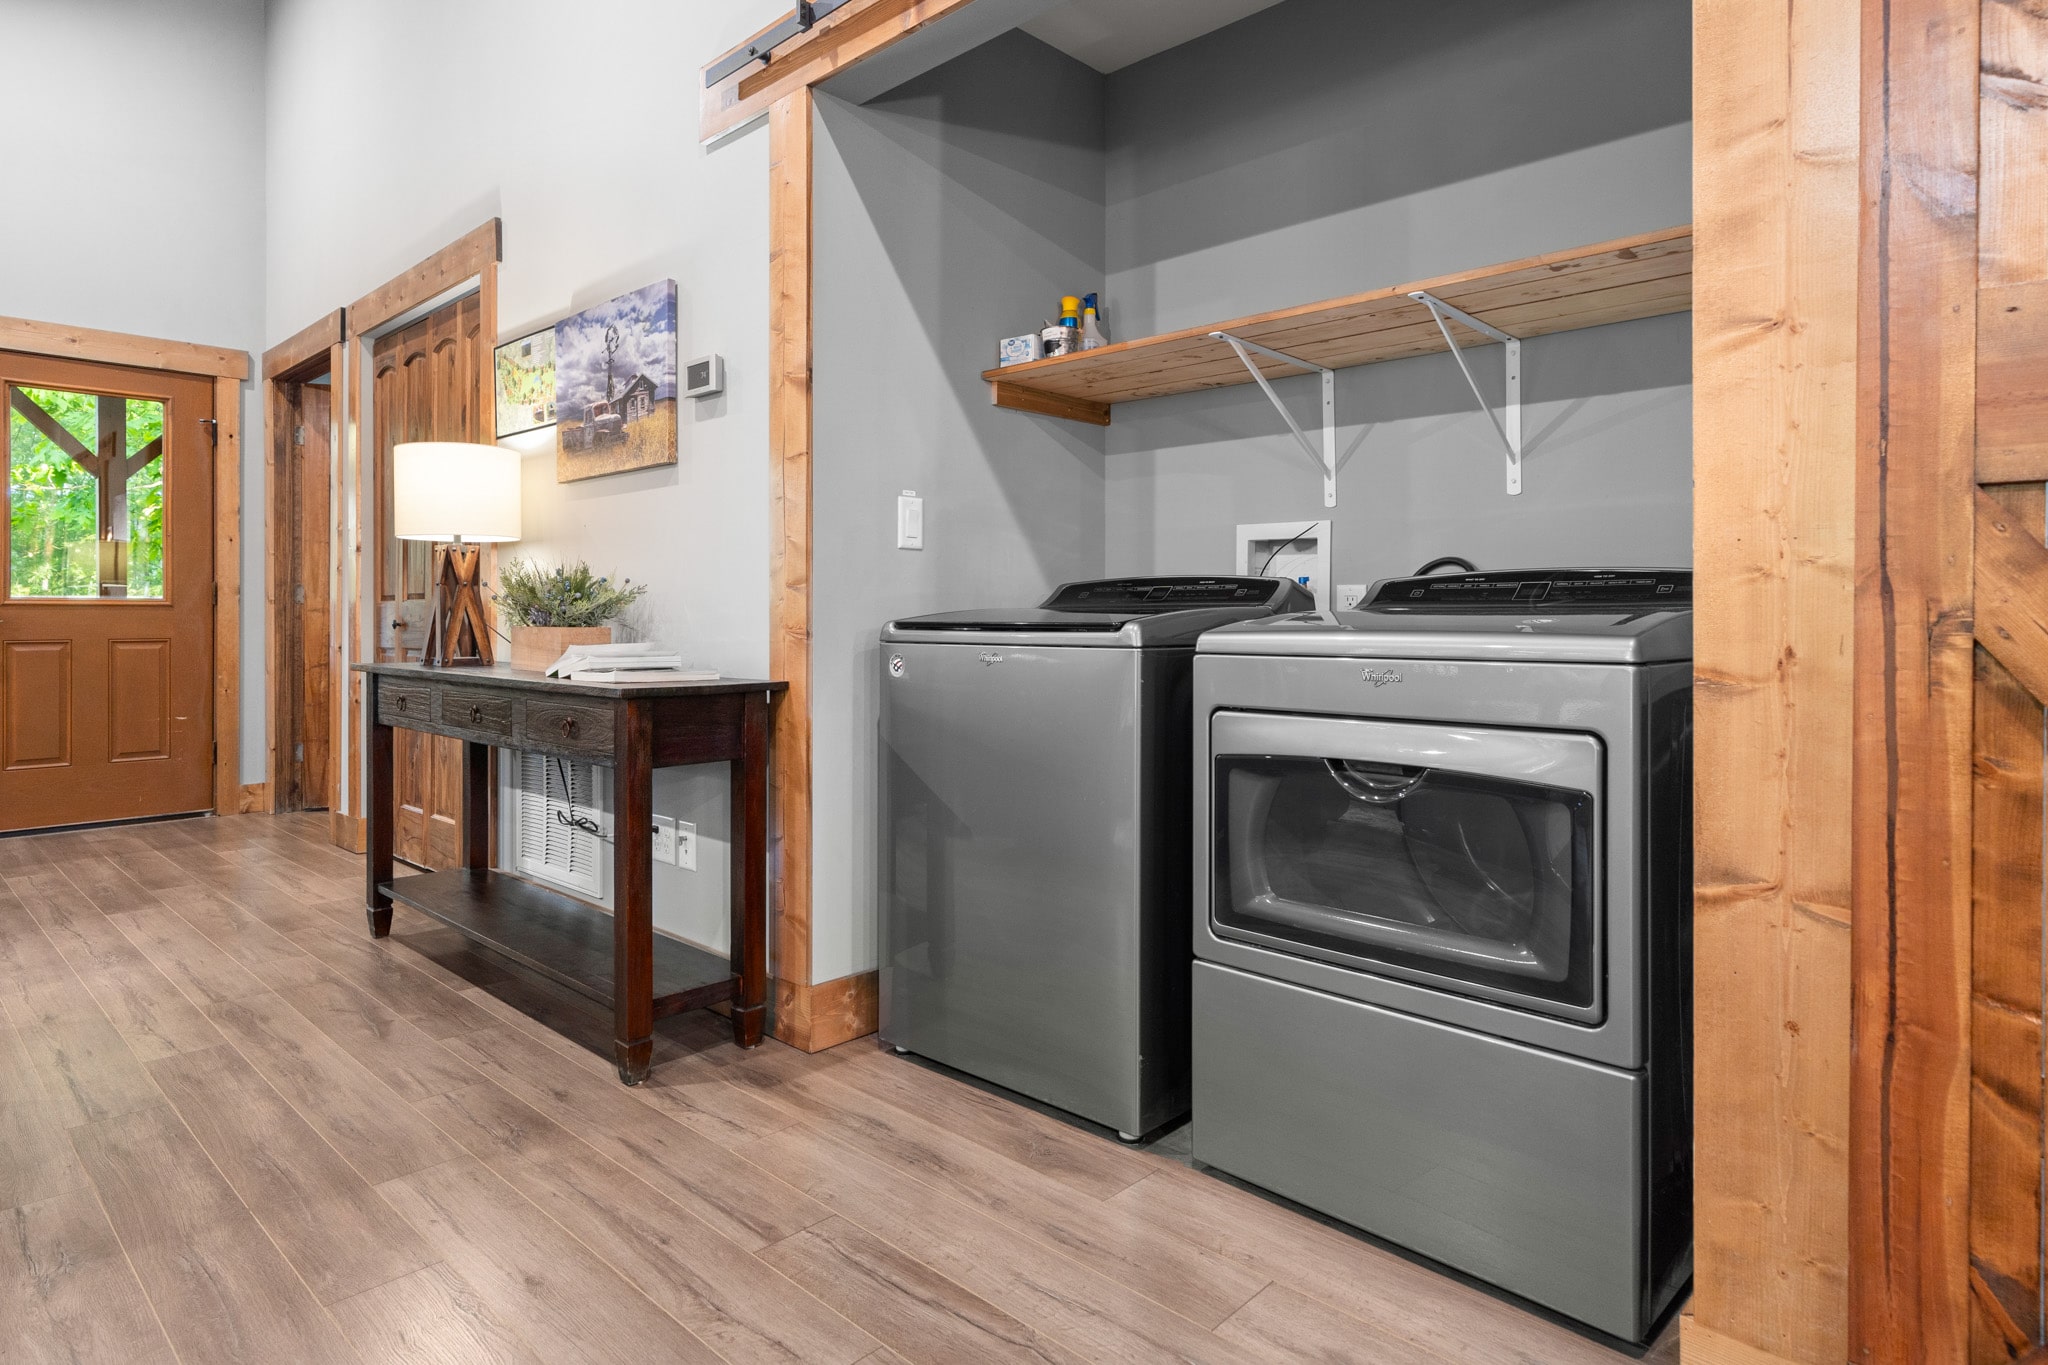 Laundry Room in the Mountain Laurel Cabin - Asheville Country Cabins Vacation Rentals